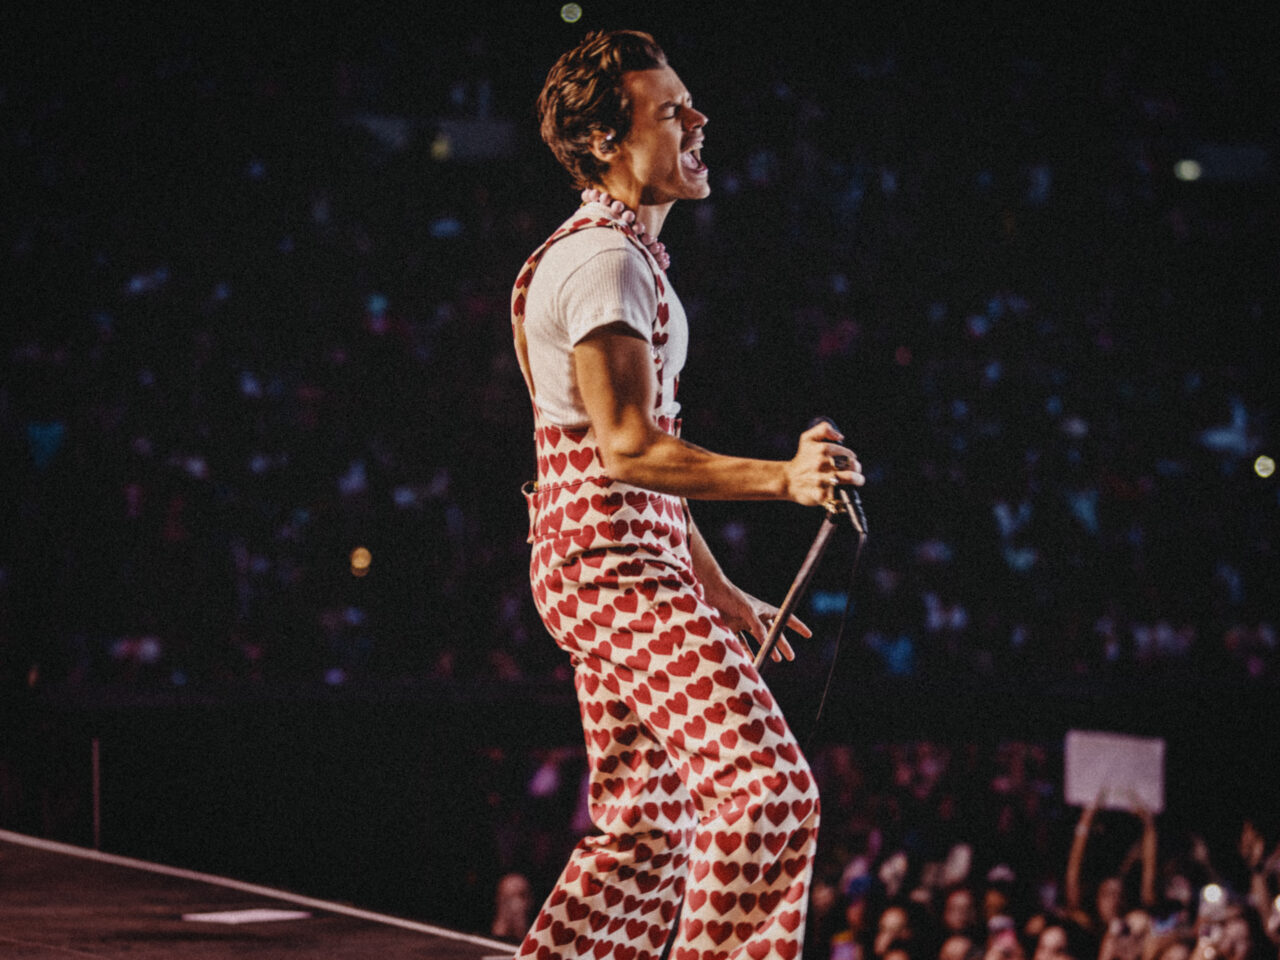 Harry Styles Love On Tour. Wembley.